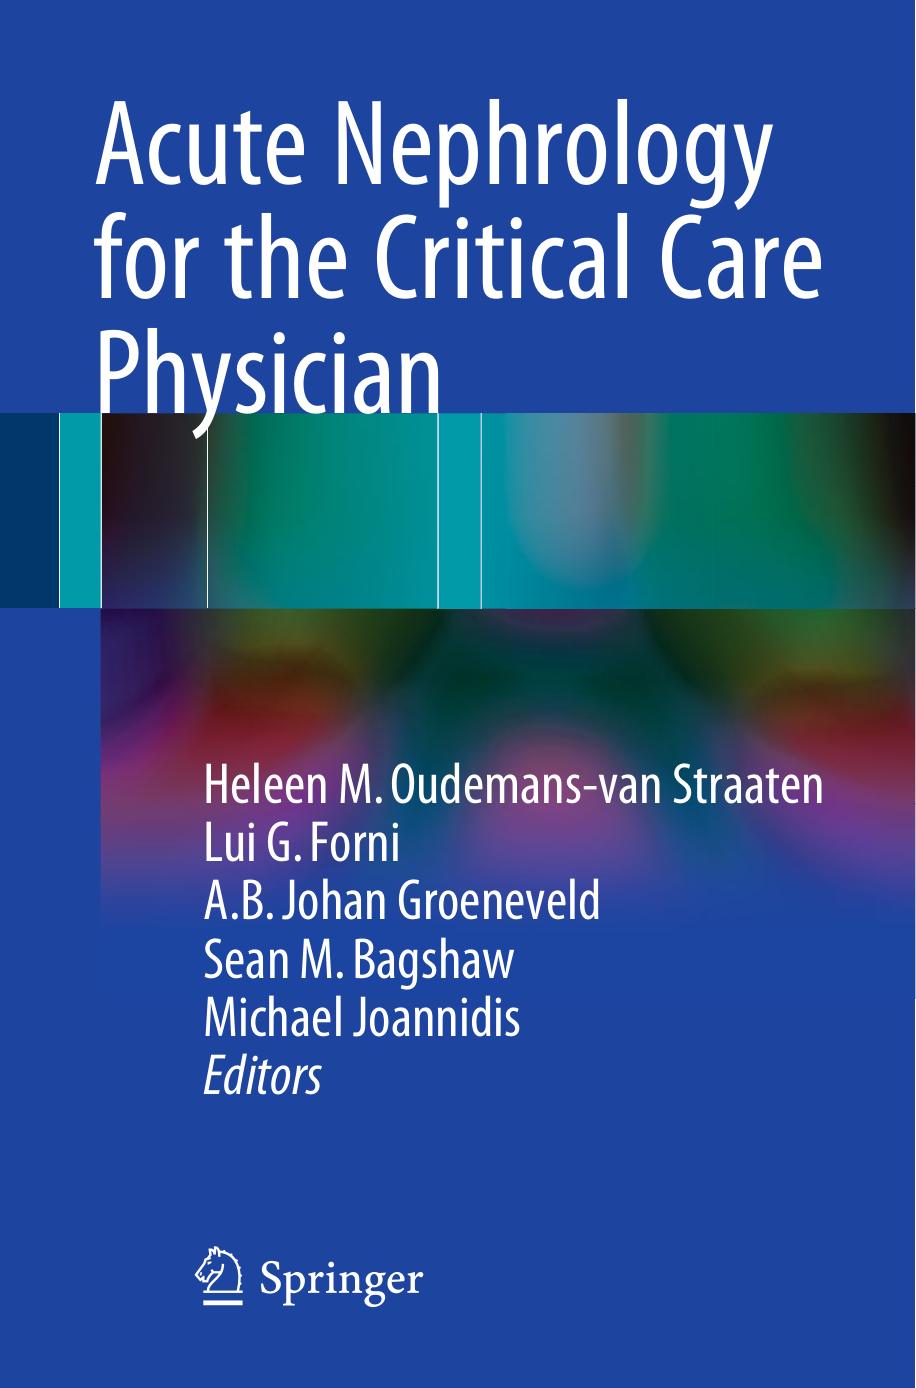 Acute Nephrology for the Critical Care Physician 2015